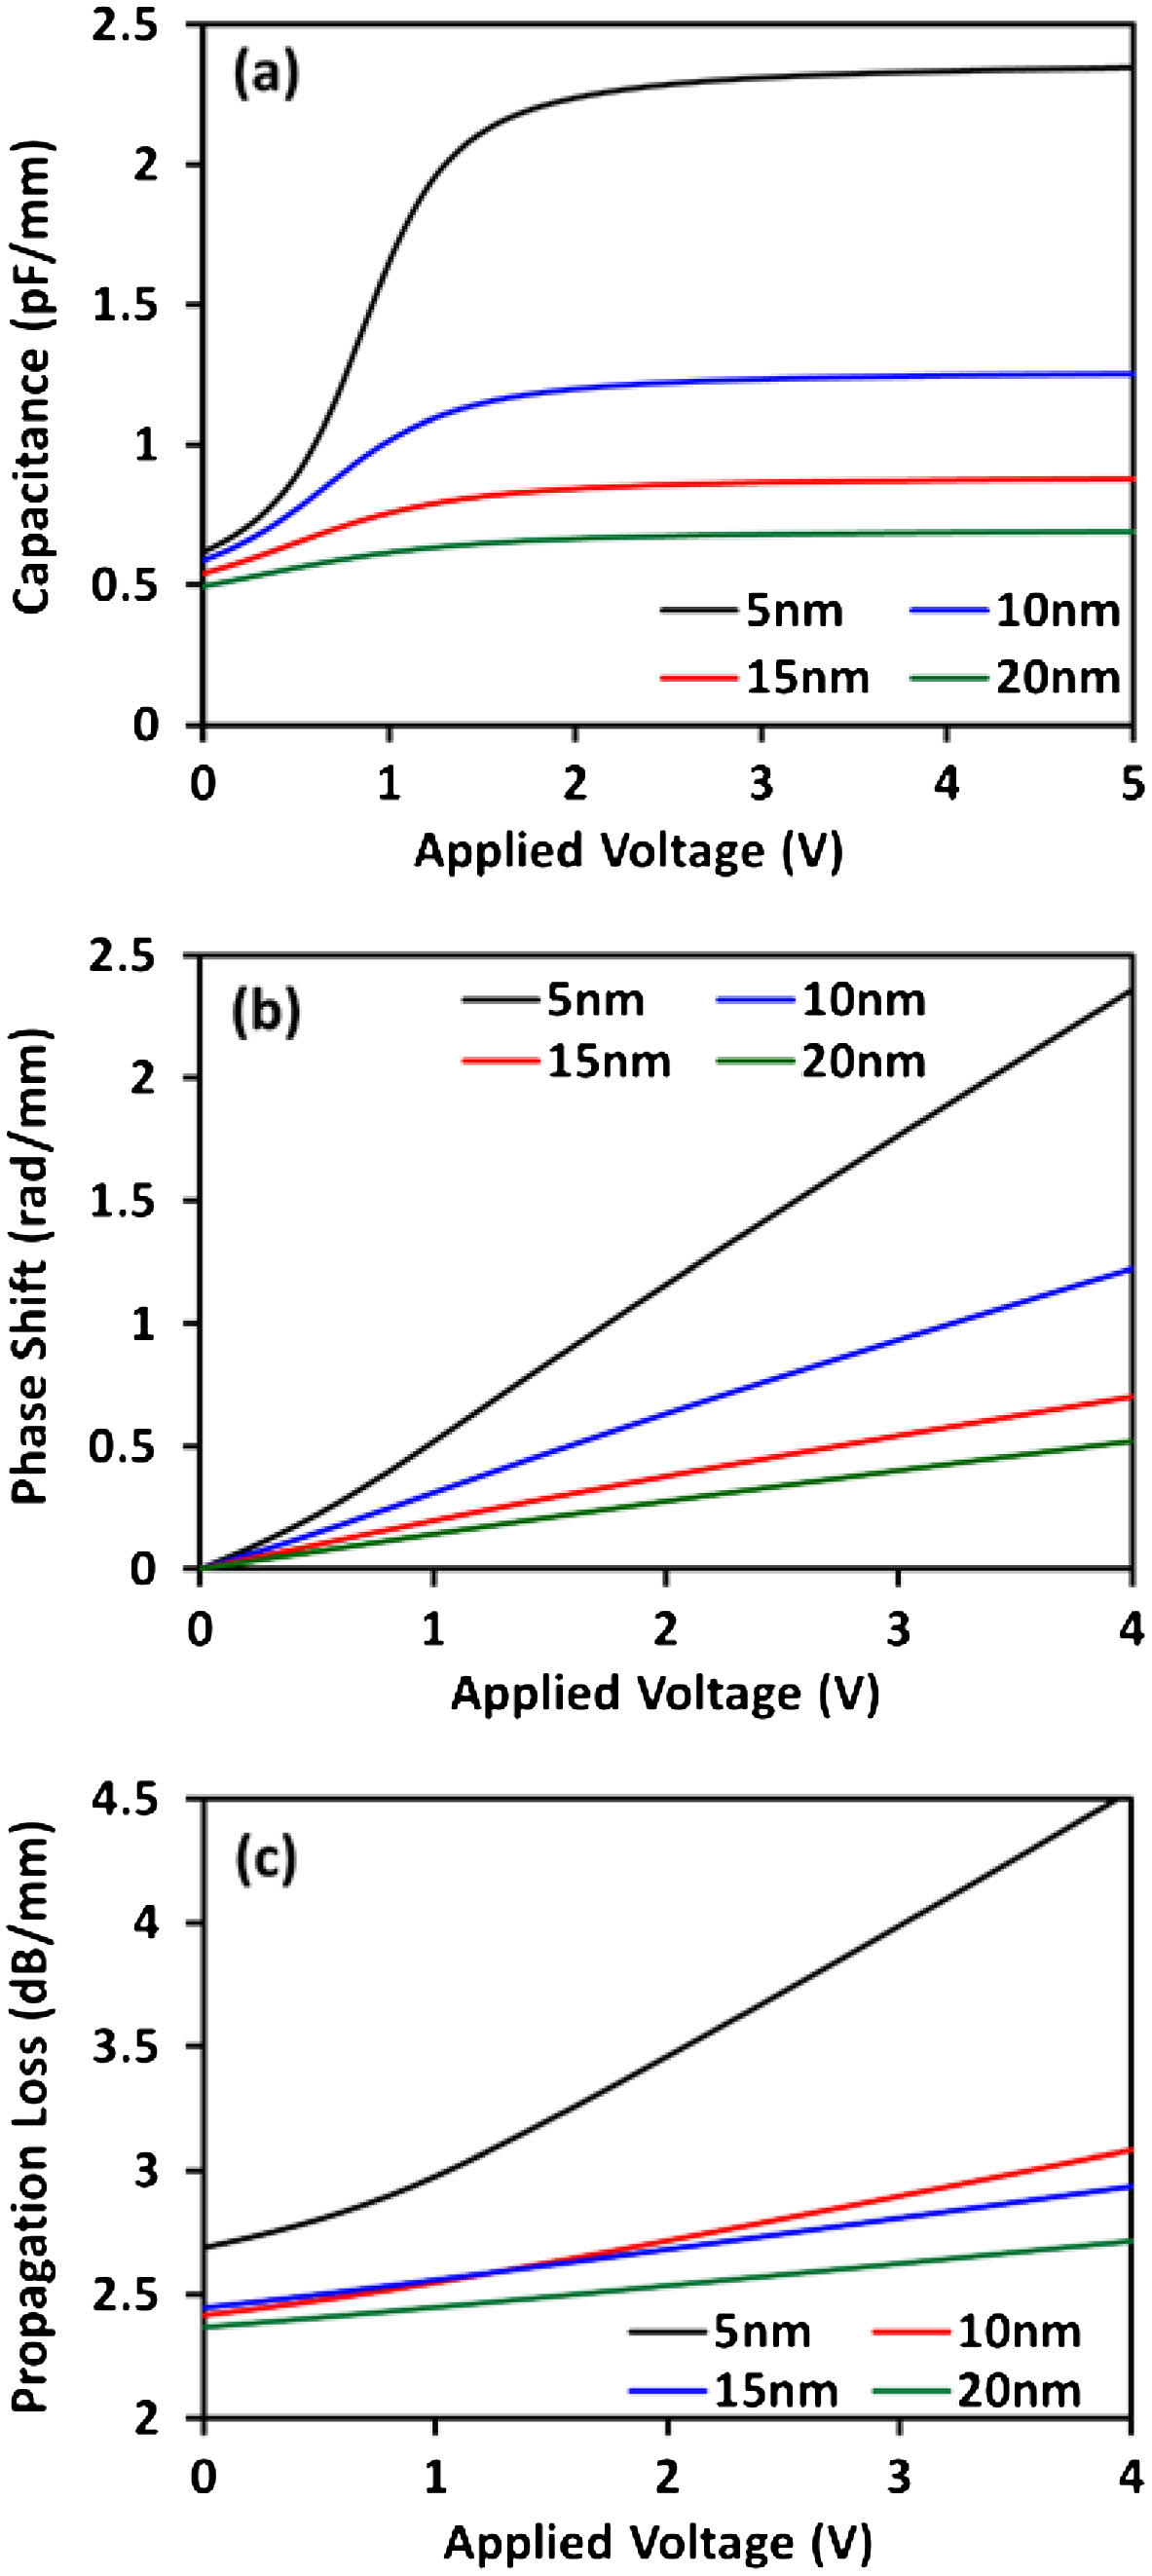 (a) Calculated change in device capacitance (in pF/mm) as a function of applied voltage. Since the modulator operates in accumulation regime, only positive bias is shown. The capacitance increases with reducing oxide thickness (tox). (b) Calculated phase shift (in rad/mm) as a function of applied voltage. The phase shift per unit length increases with reducing oxide thickness and applied voltage. (c) Calculated propagation loss (in dB/mm) as a function of applied voltage. The loss increases with reducing oxide thickness and applied voltage.